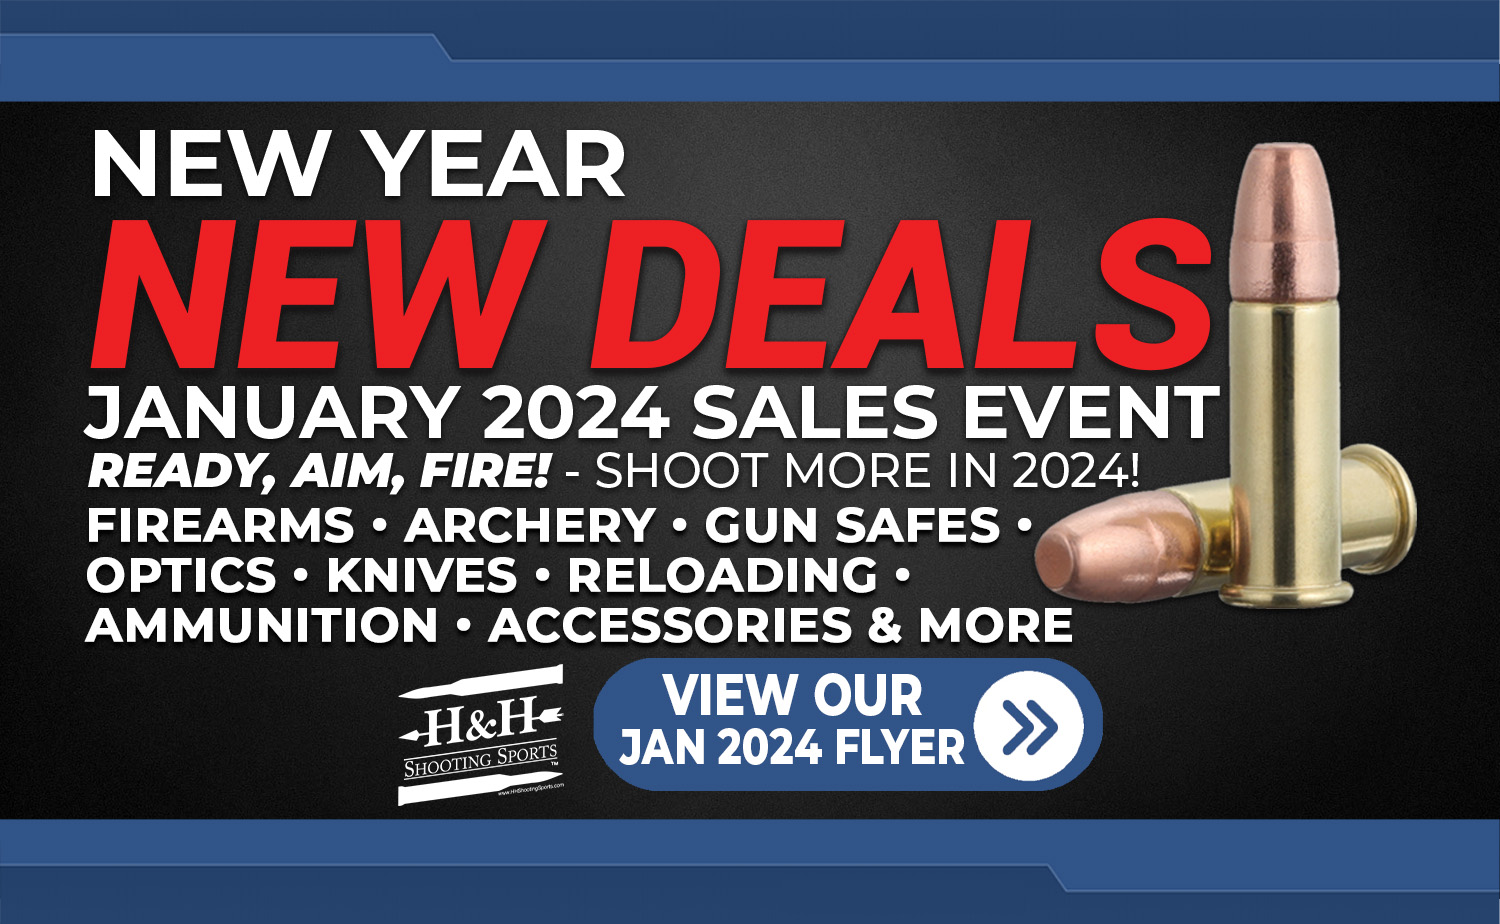 New year deal for H&H Shooting sports in OK